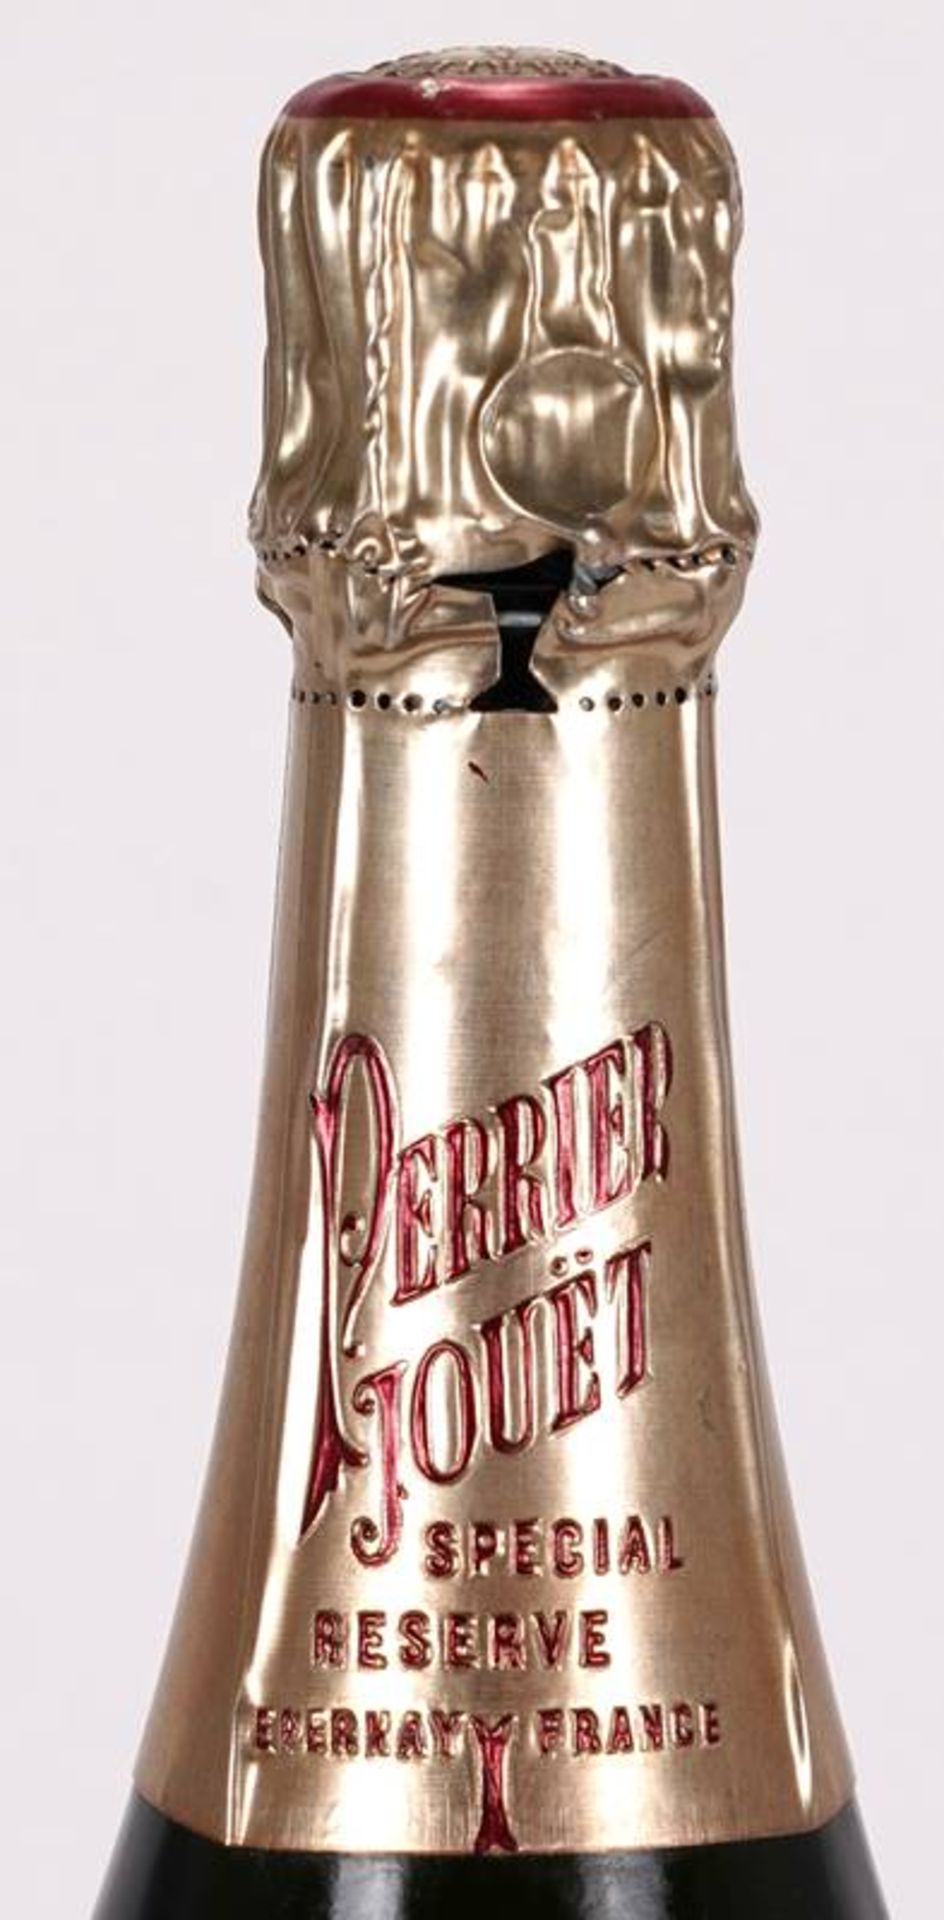 1 bottle Perrier-Jouet Champagne - Image 3 of 5